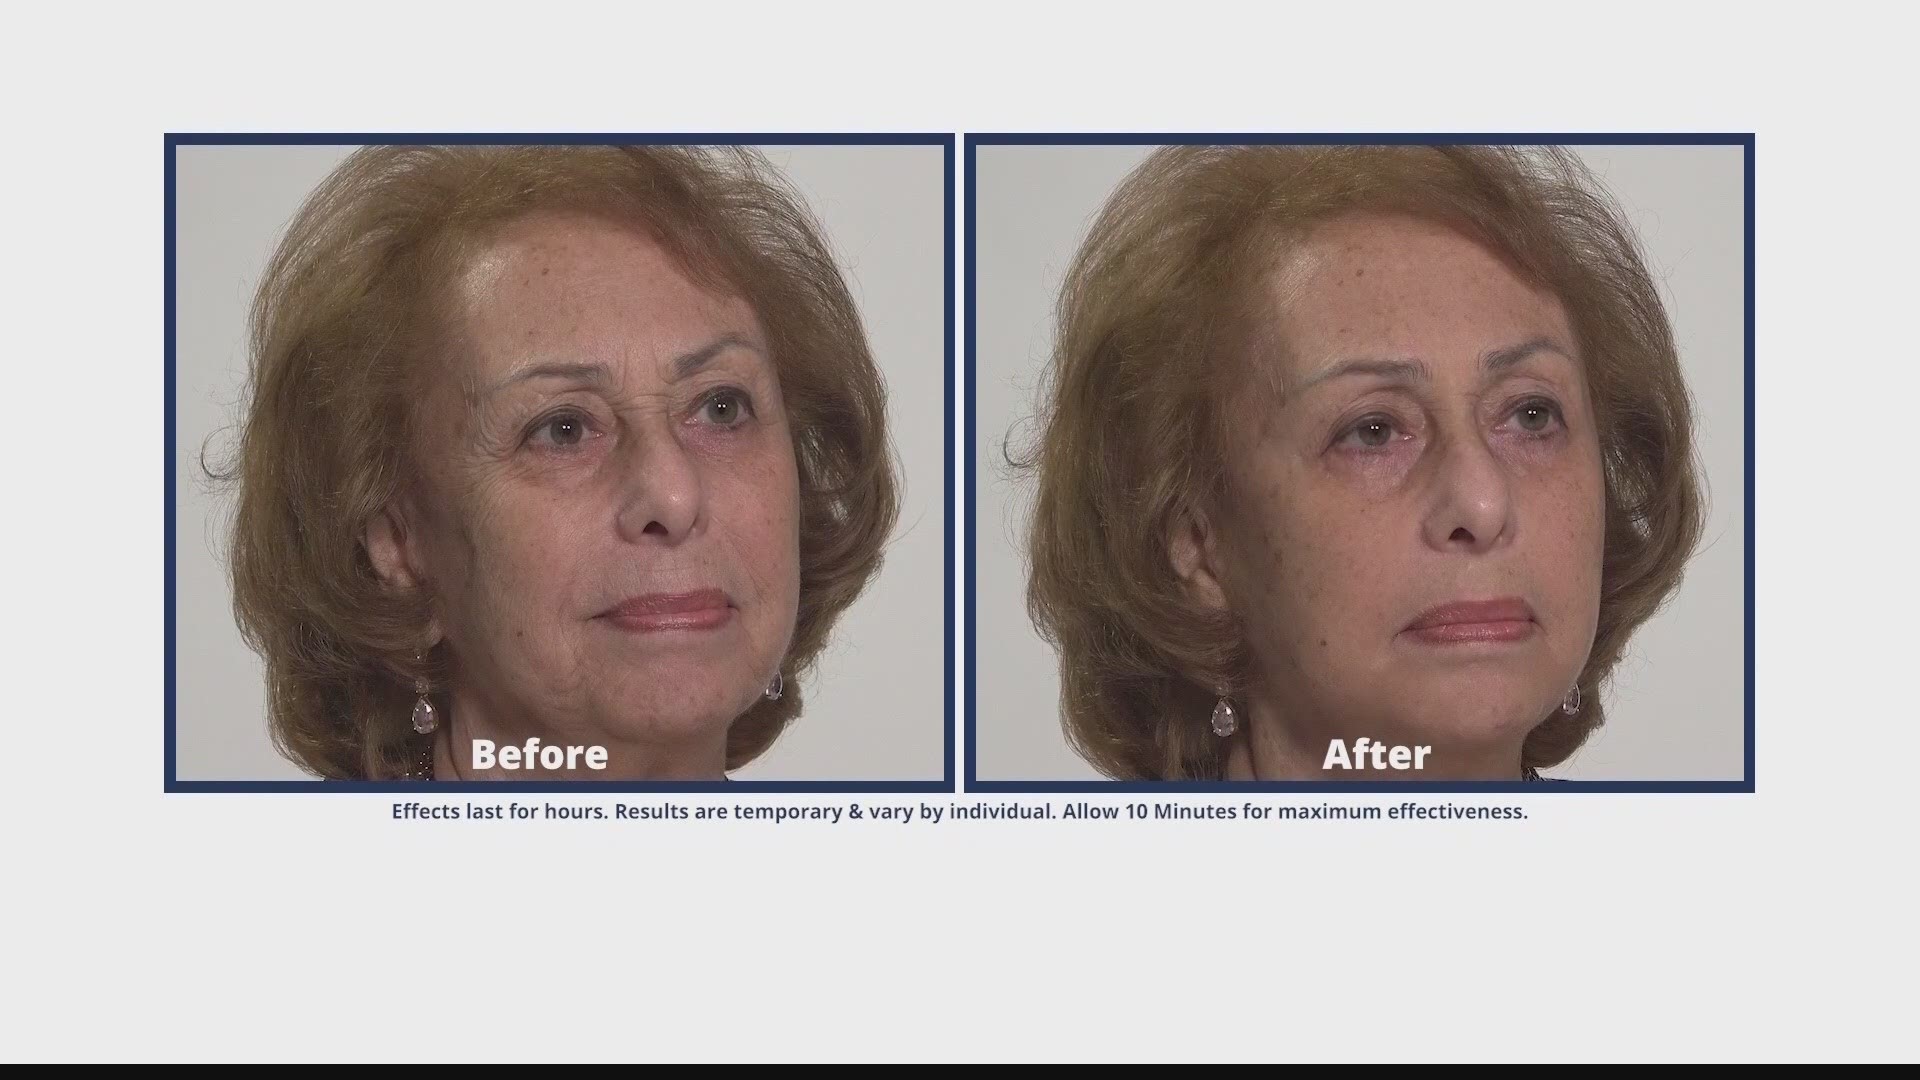 A lot of our viewers have taken the Plexaderm 10-minute challenge to shrink their under-eye bags and wrinkles from view.